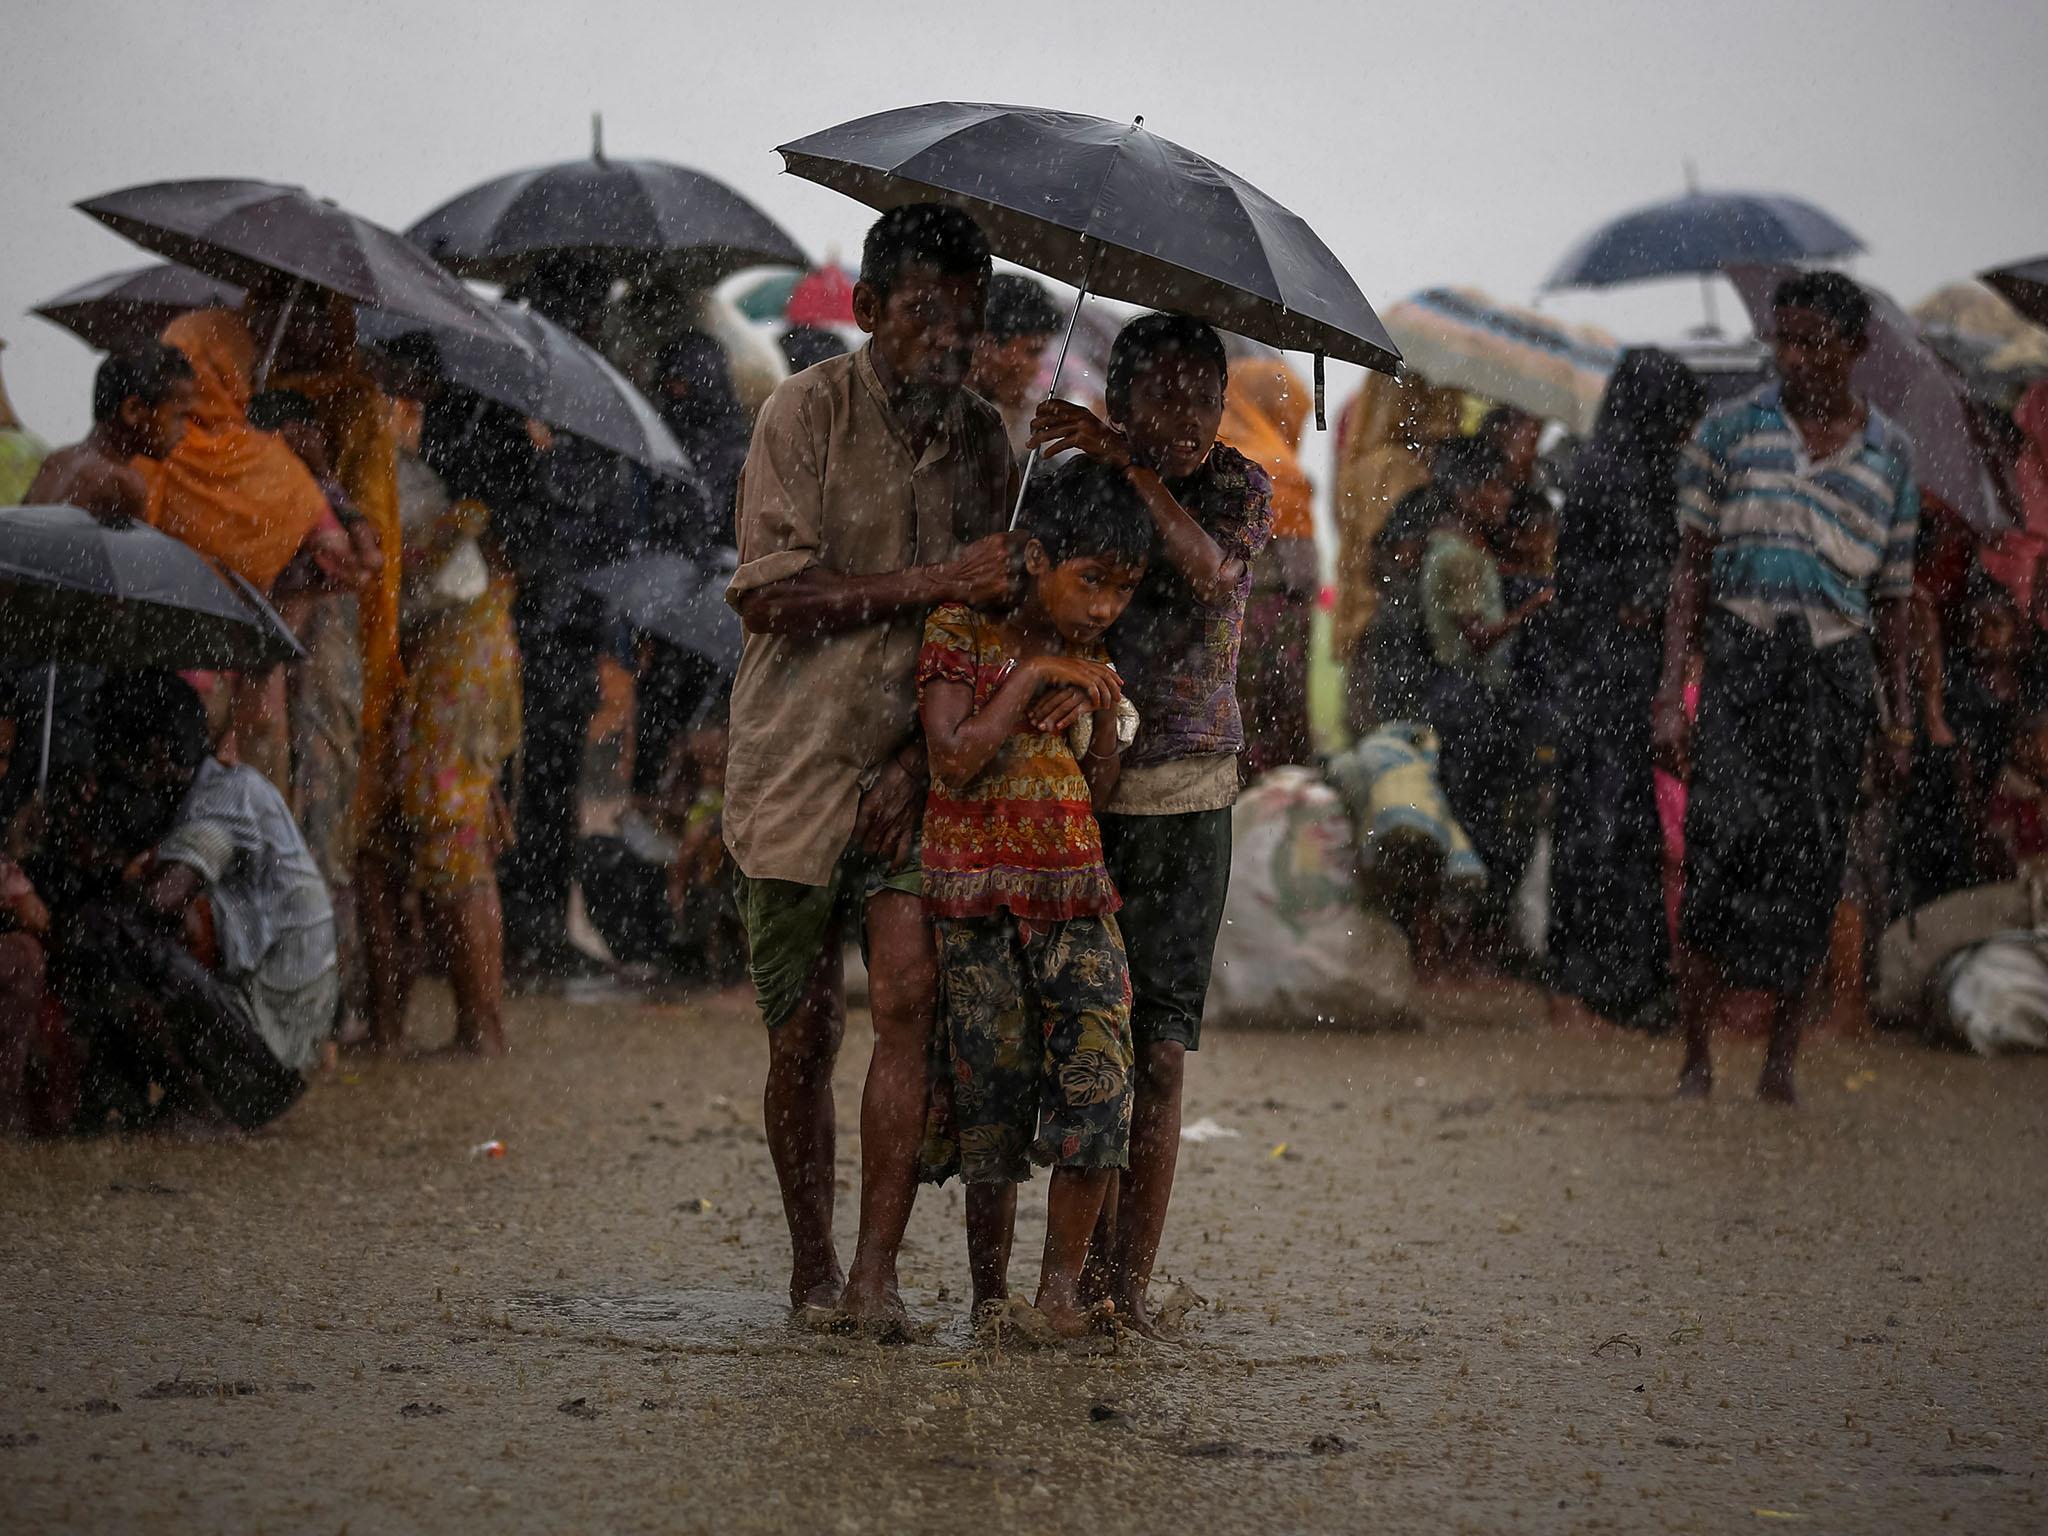 Rohingya refugees try to take shelter from torrential rain as they are held by the Border Guard Bangladesh (BGB) after illegally crossing the border, in Teknaf, Bangladesh